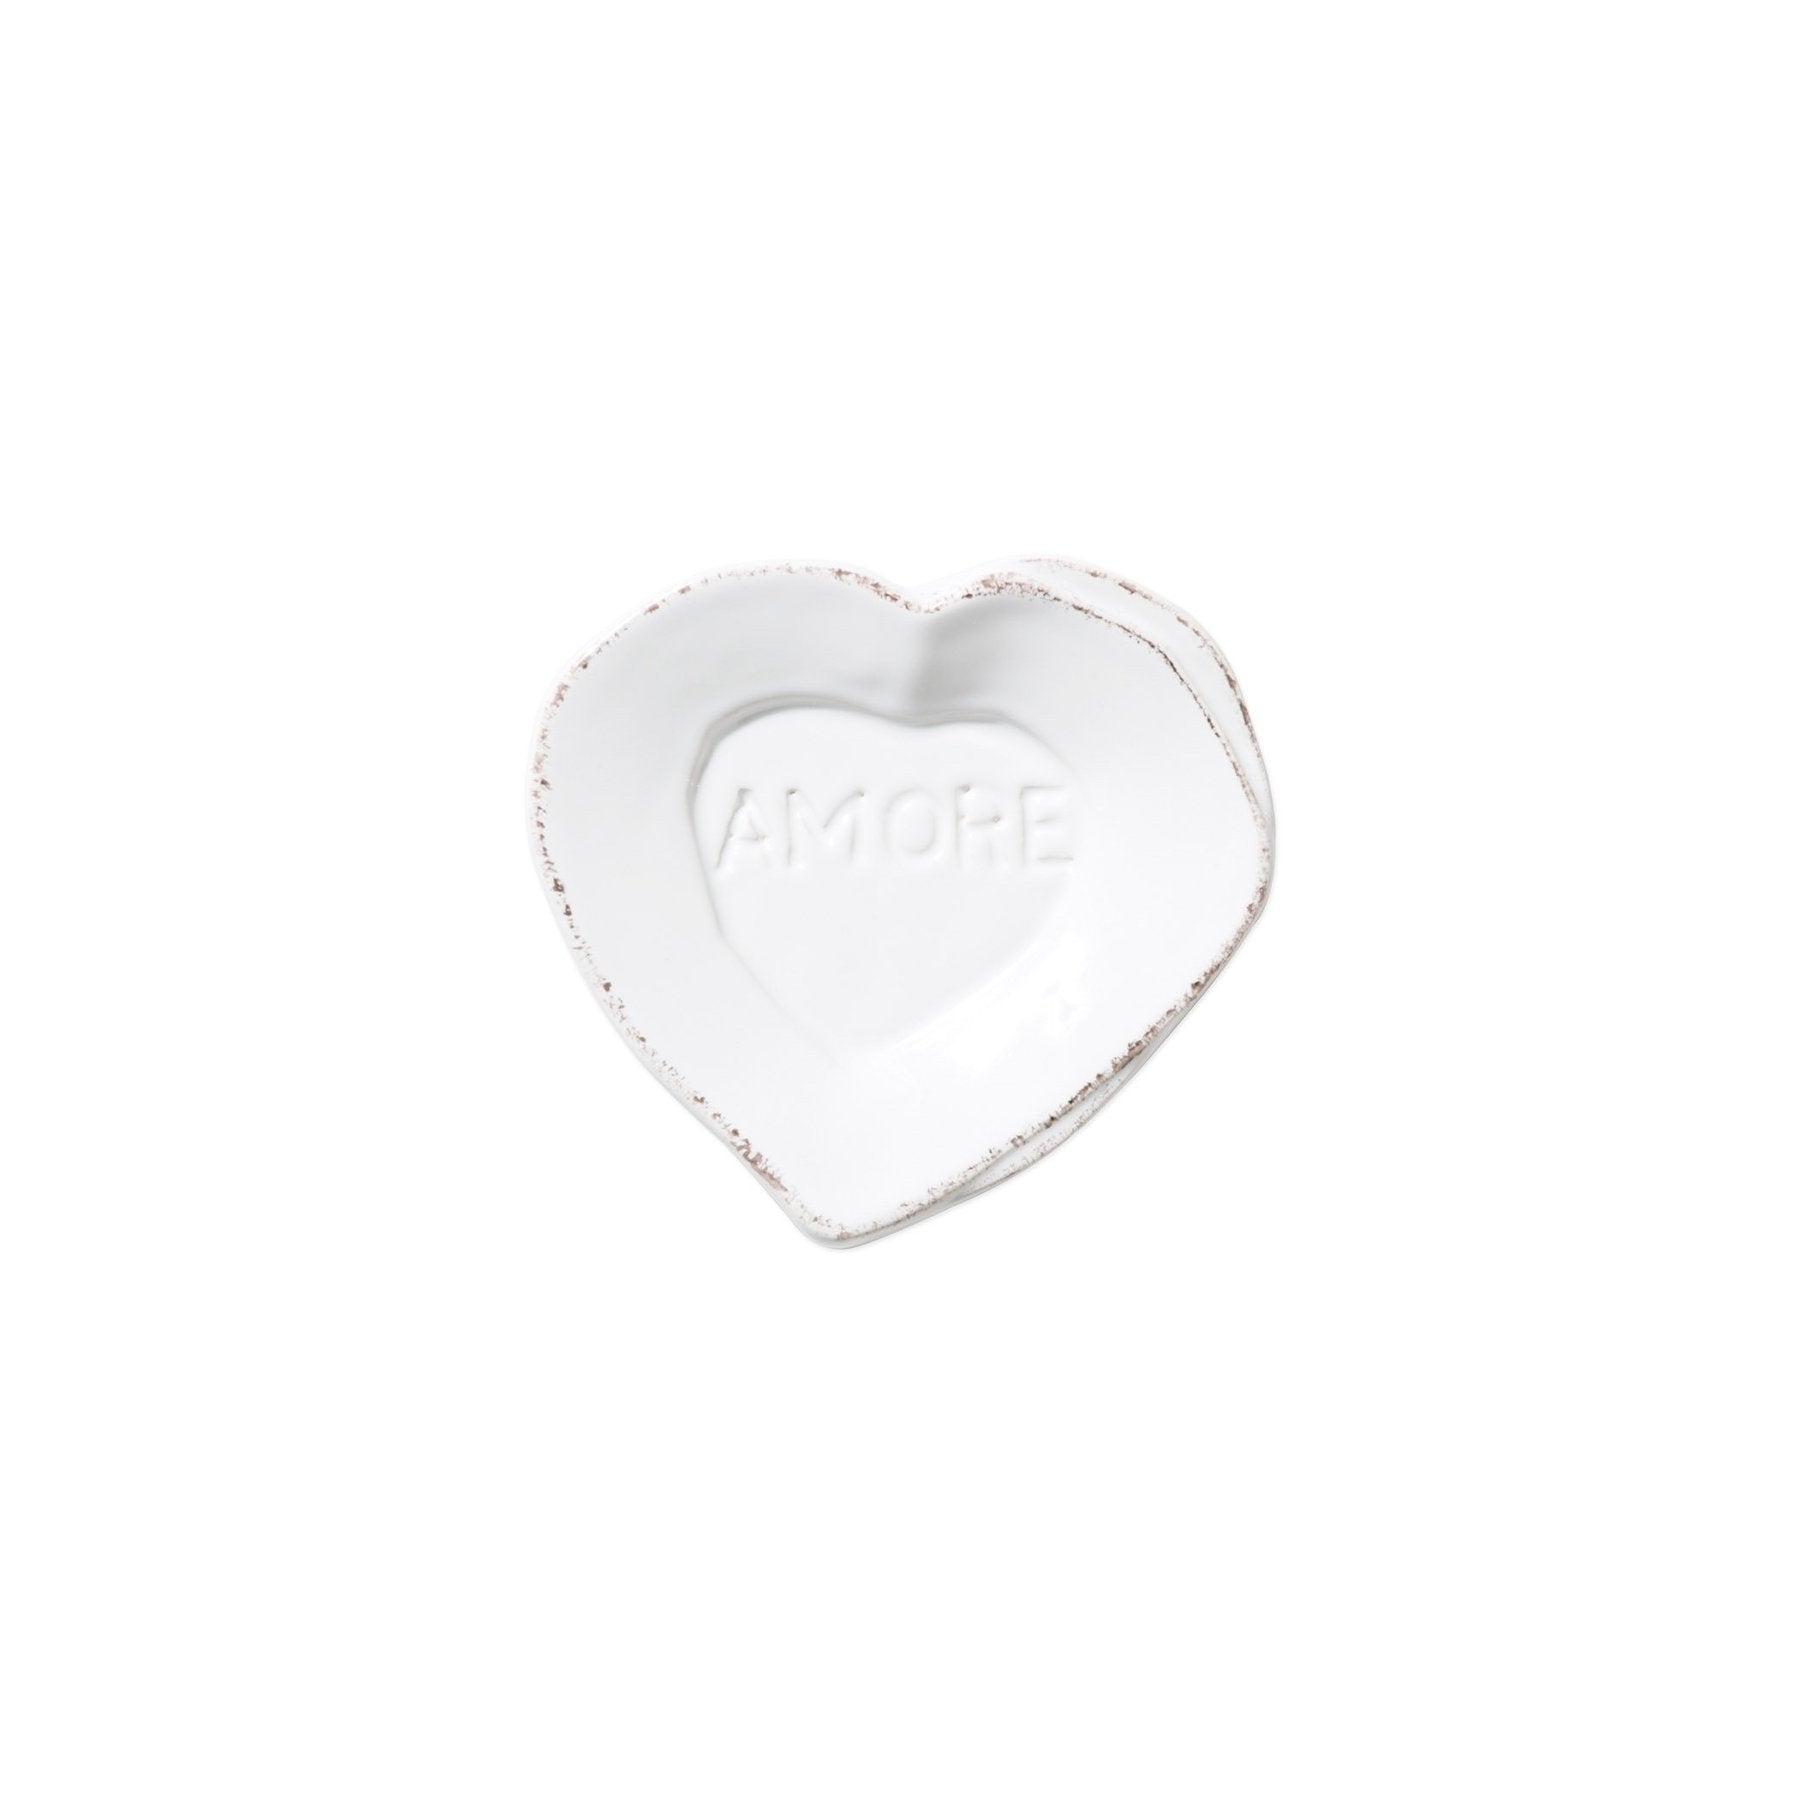 Lastra Heart Mini Amore Plate Available in White or Red